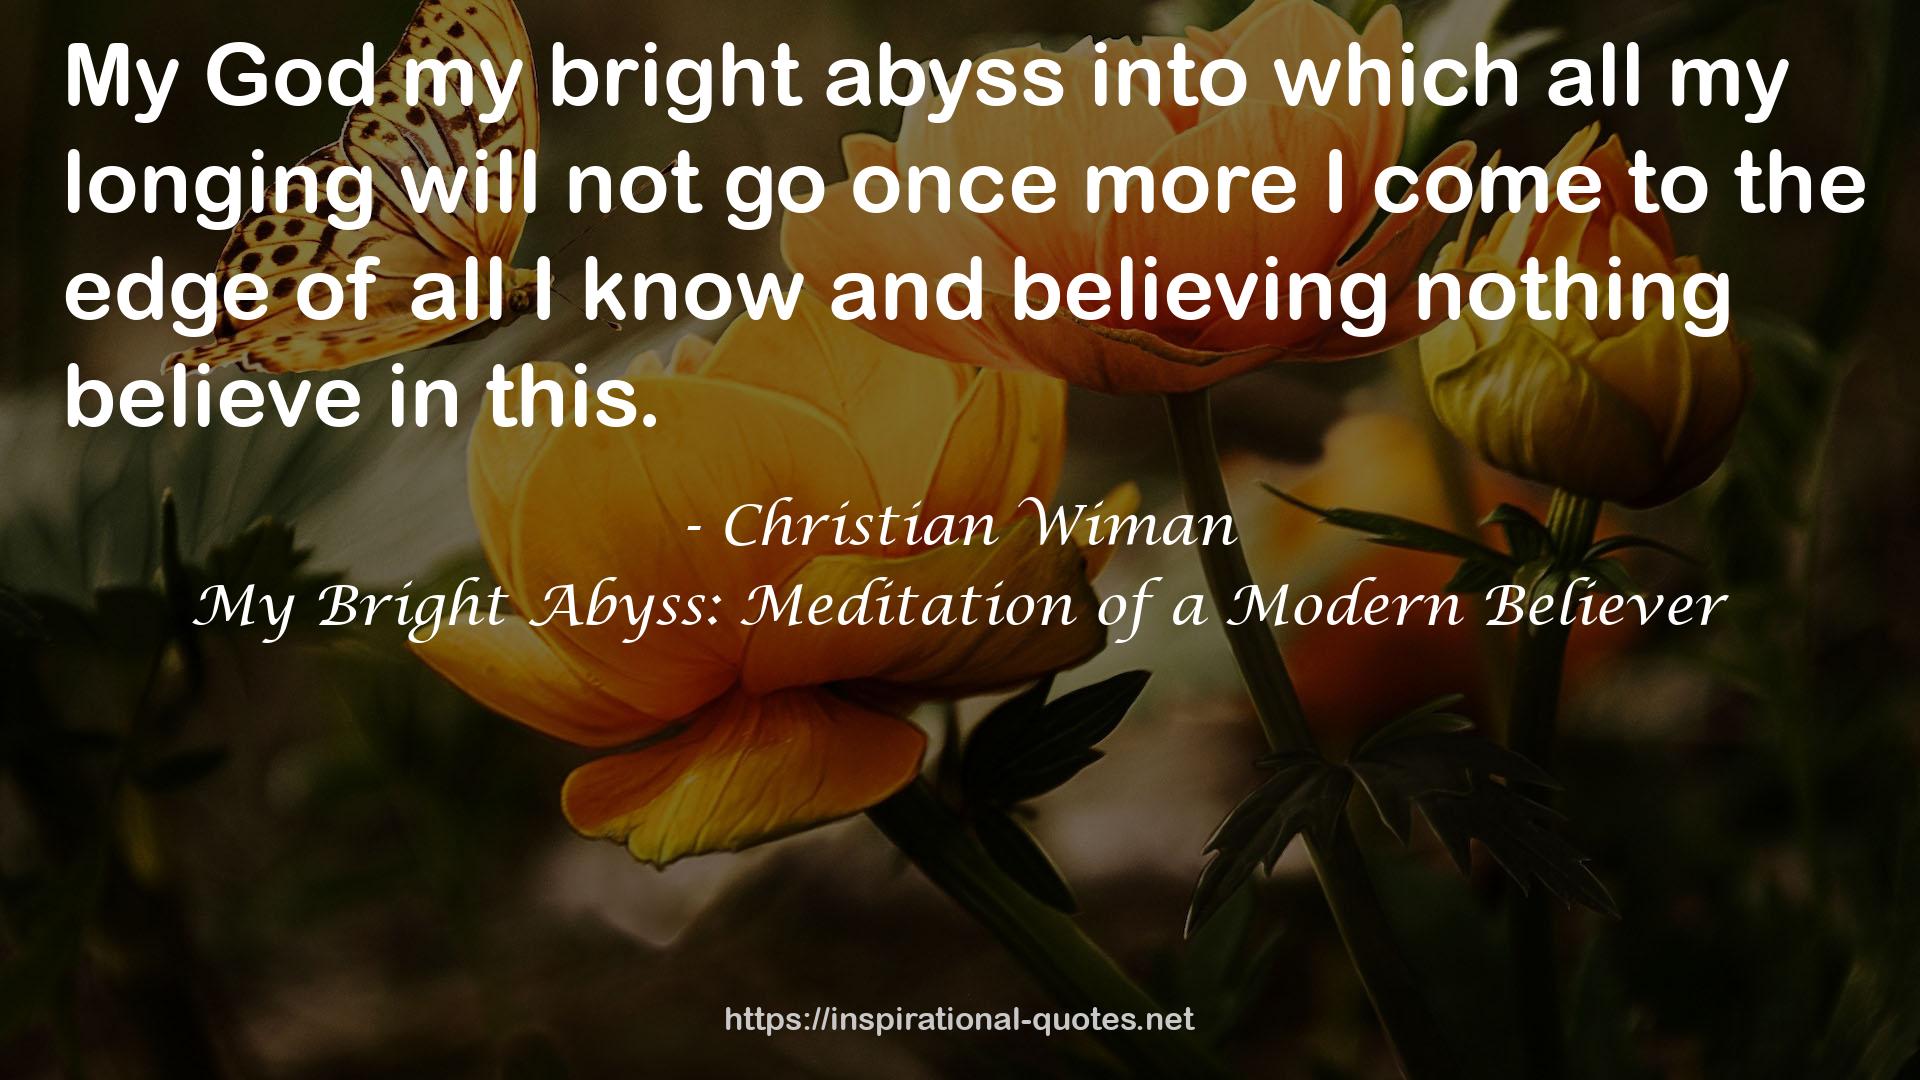 Christian Wiman QUOTES